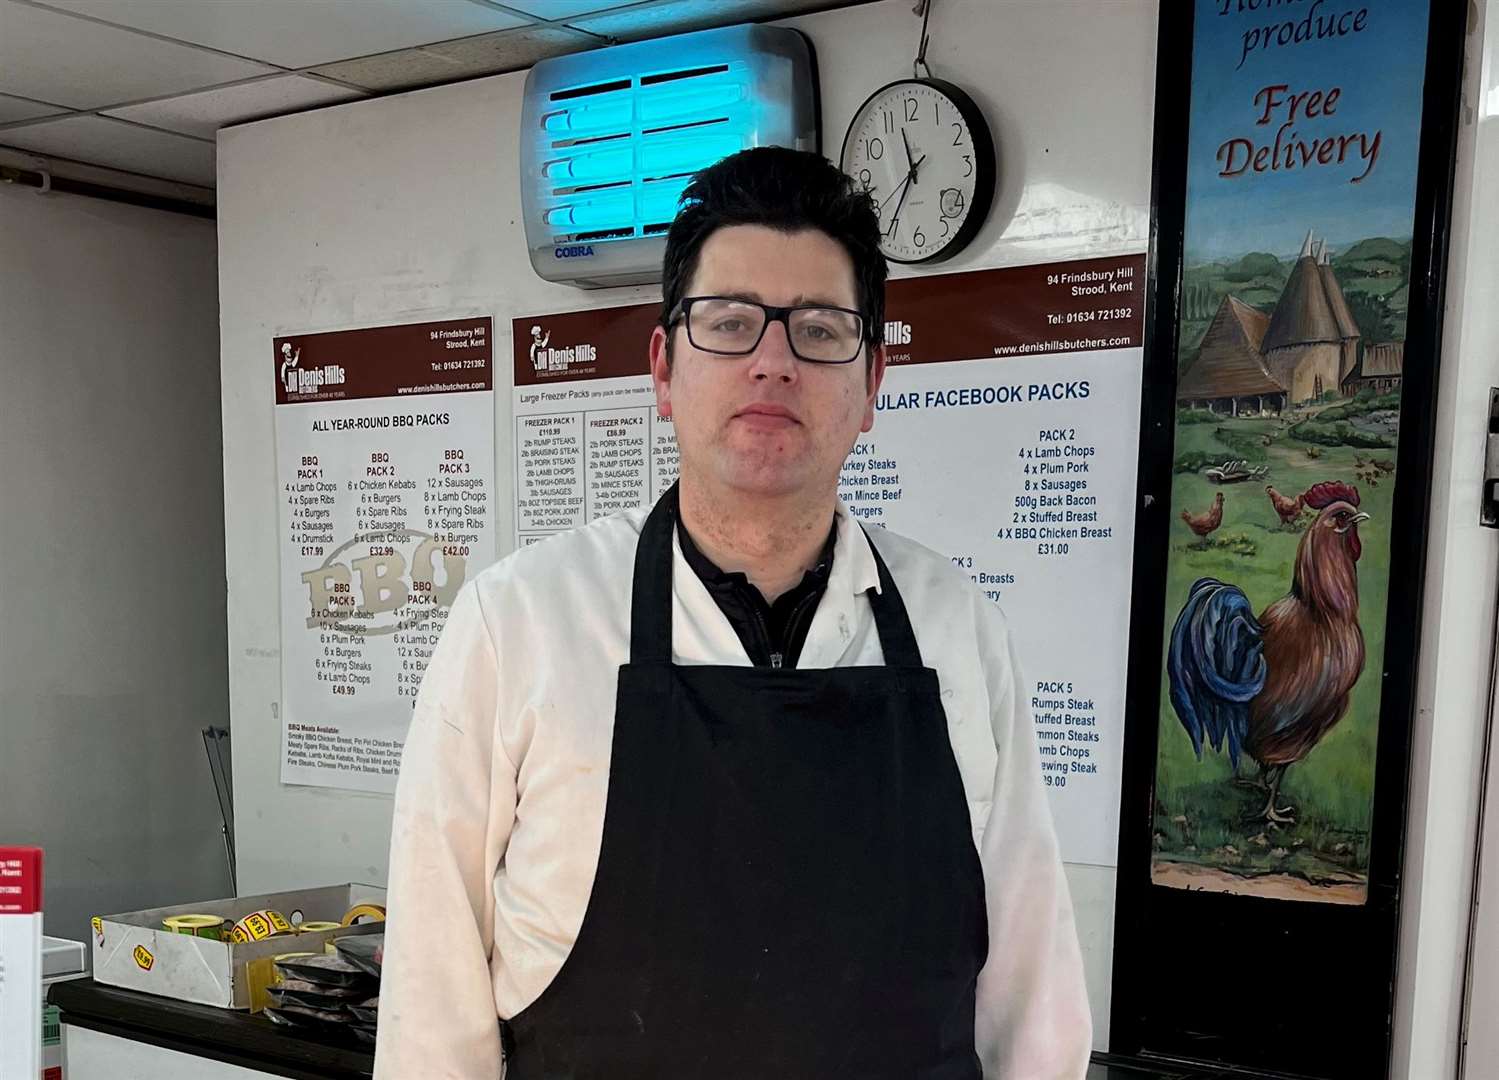 Adam Stone is the manager at Denis Hills Quality Butchers on Frindsbury Hill